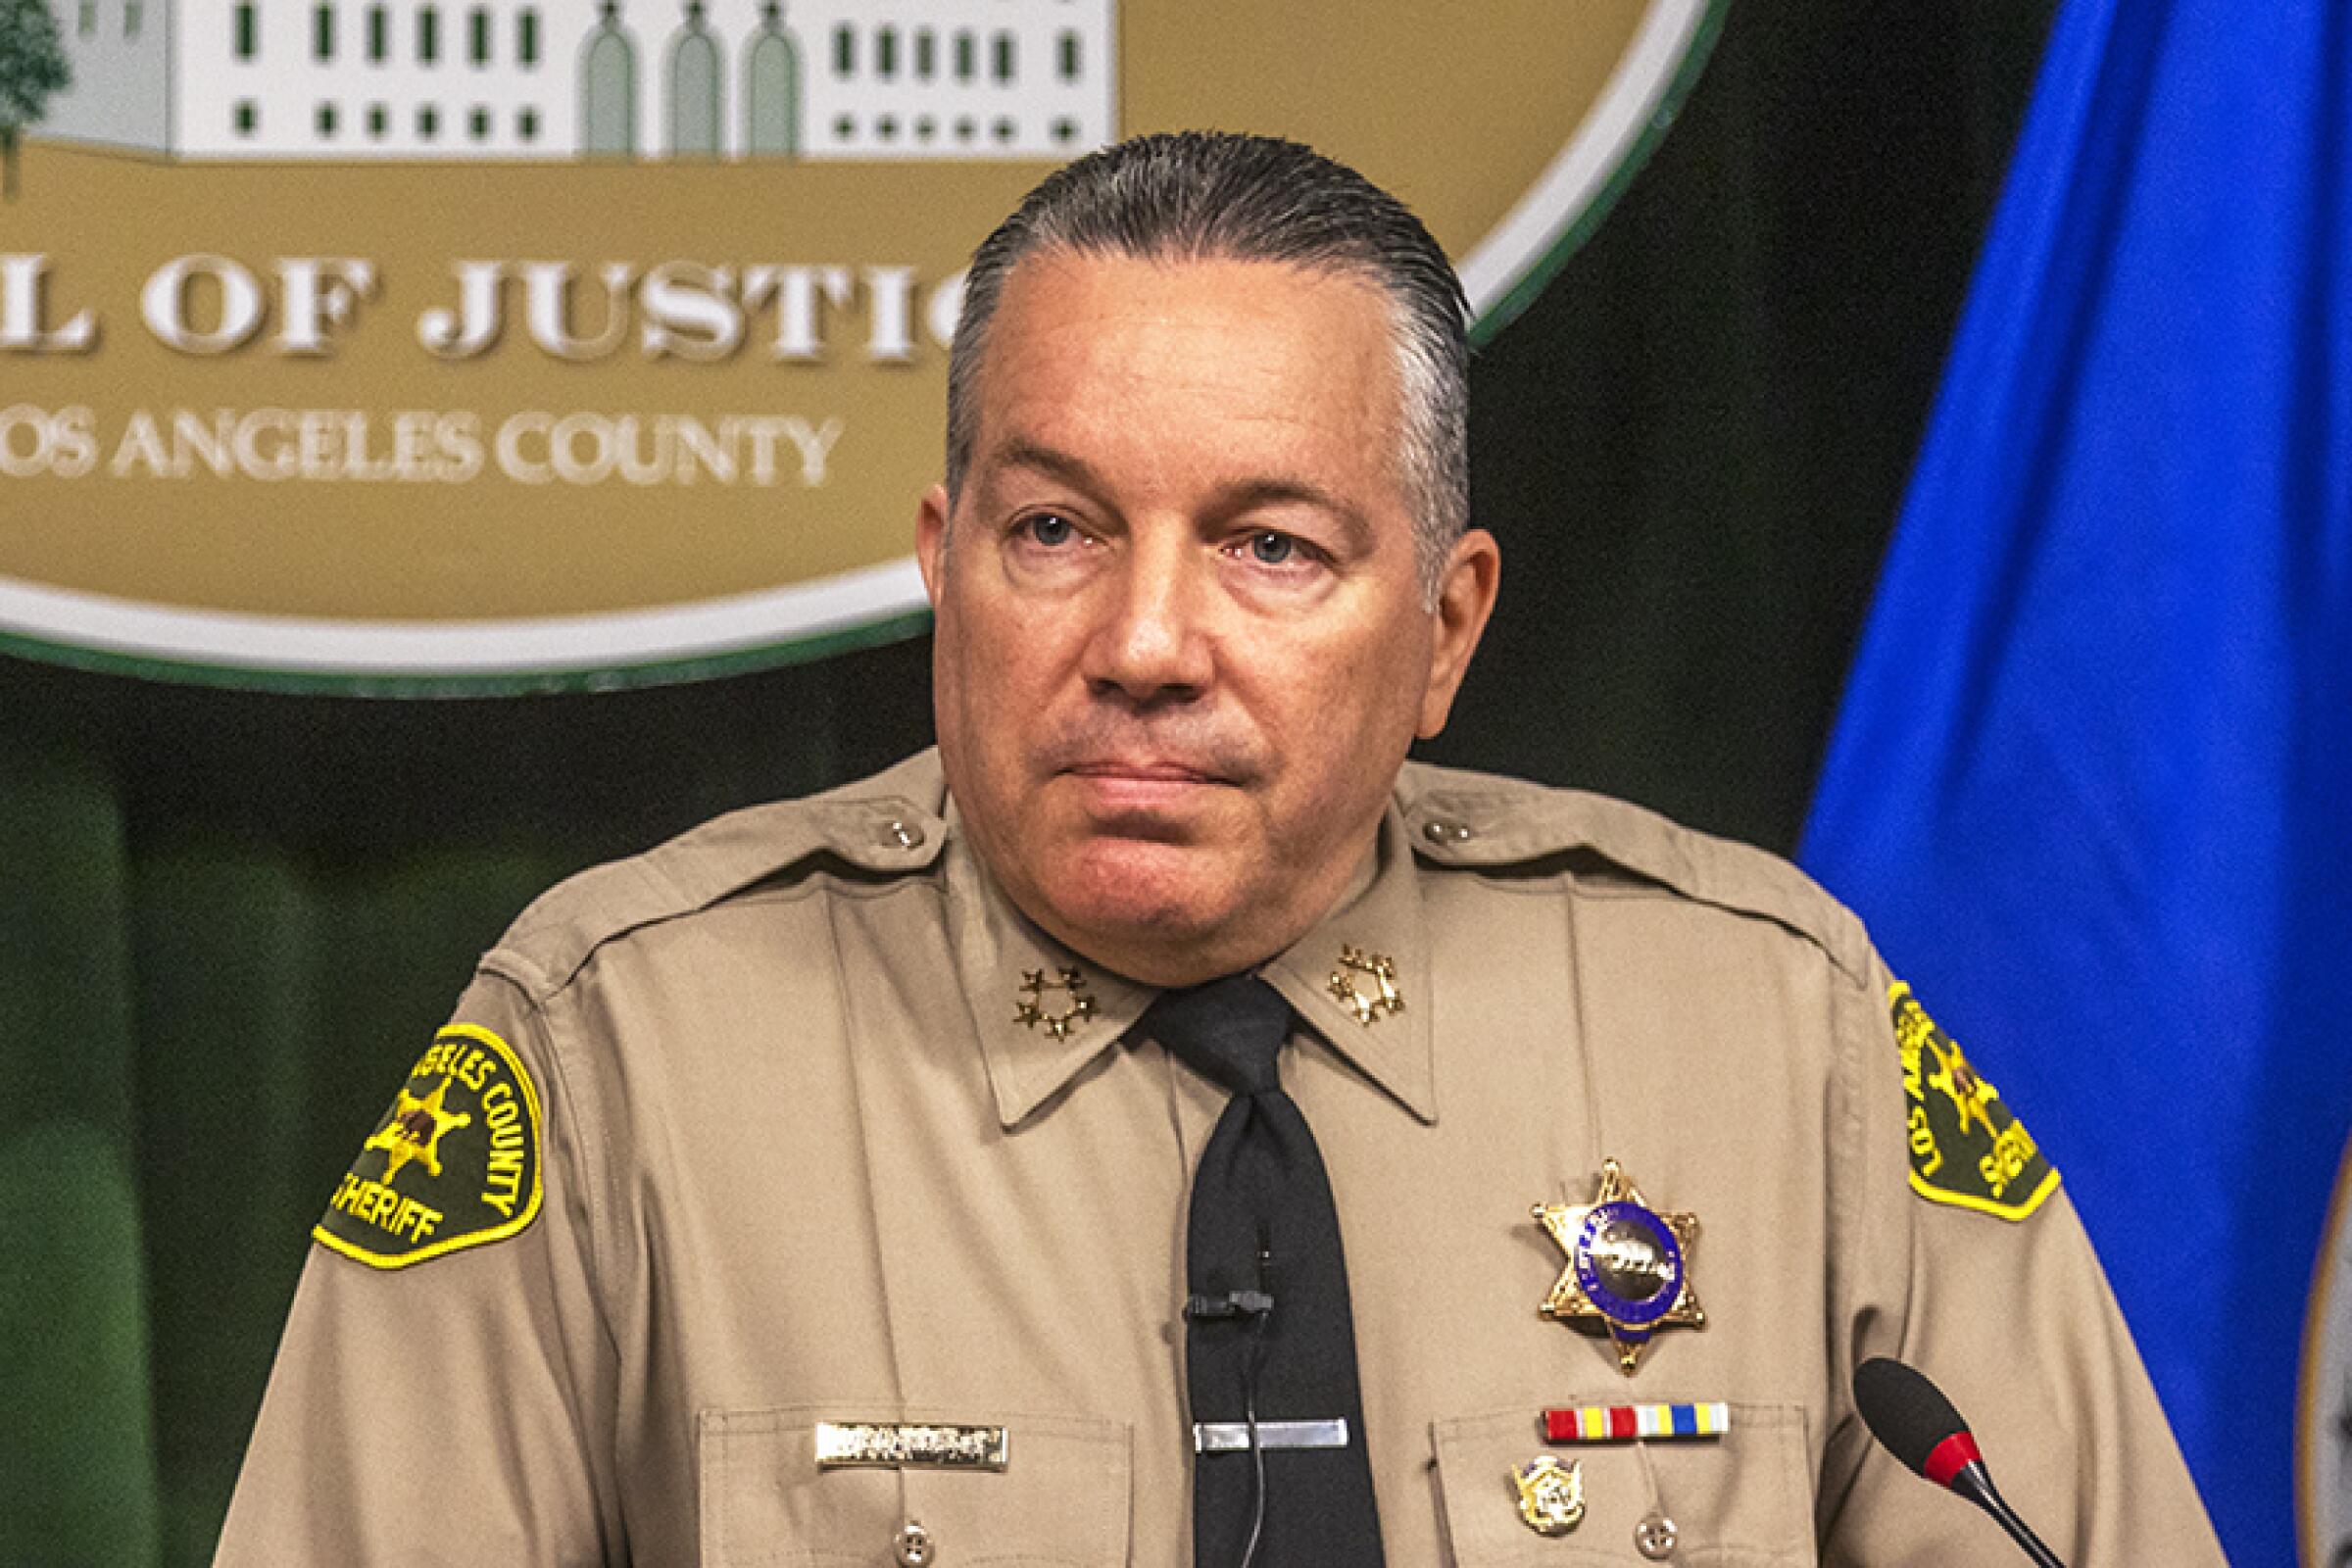 A sheriff at a press conference